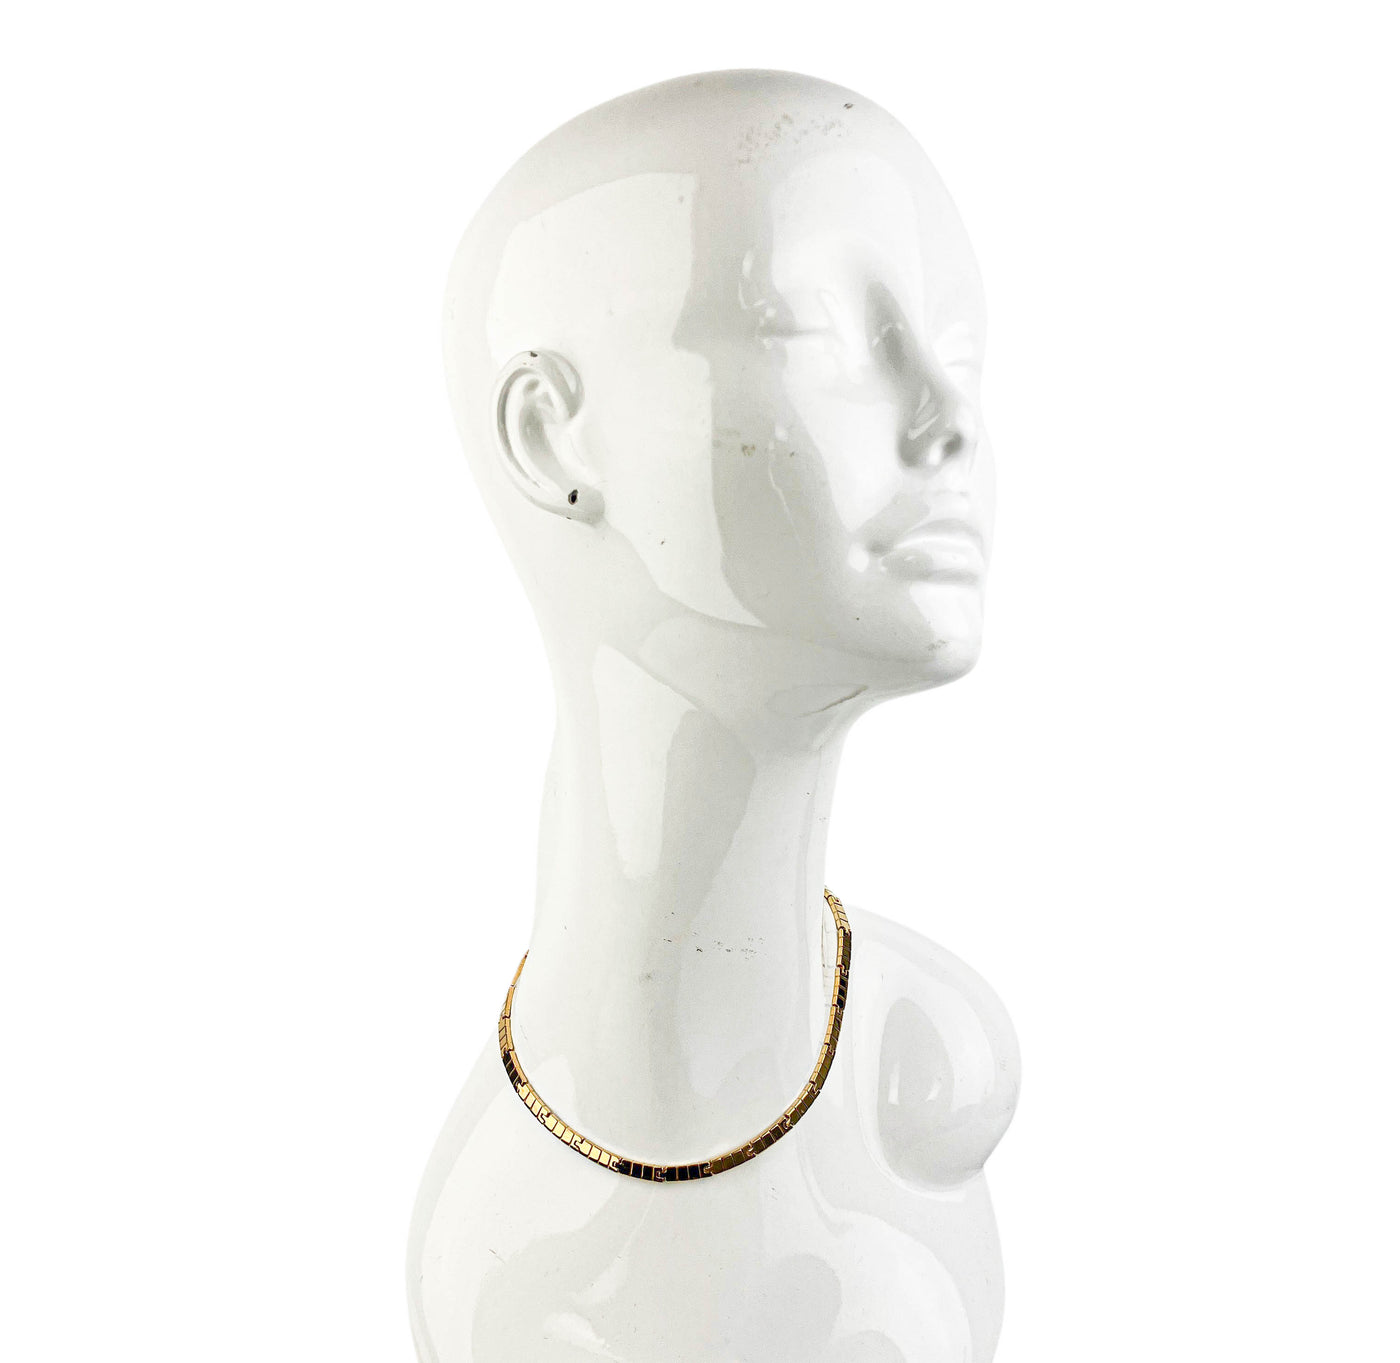 IVI Slot Chain Princess Collar Necklace in Gold - Discounts on IVI at UAL